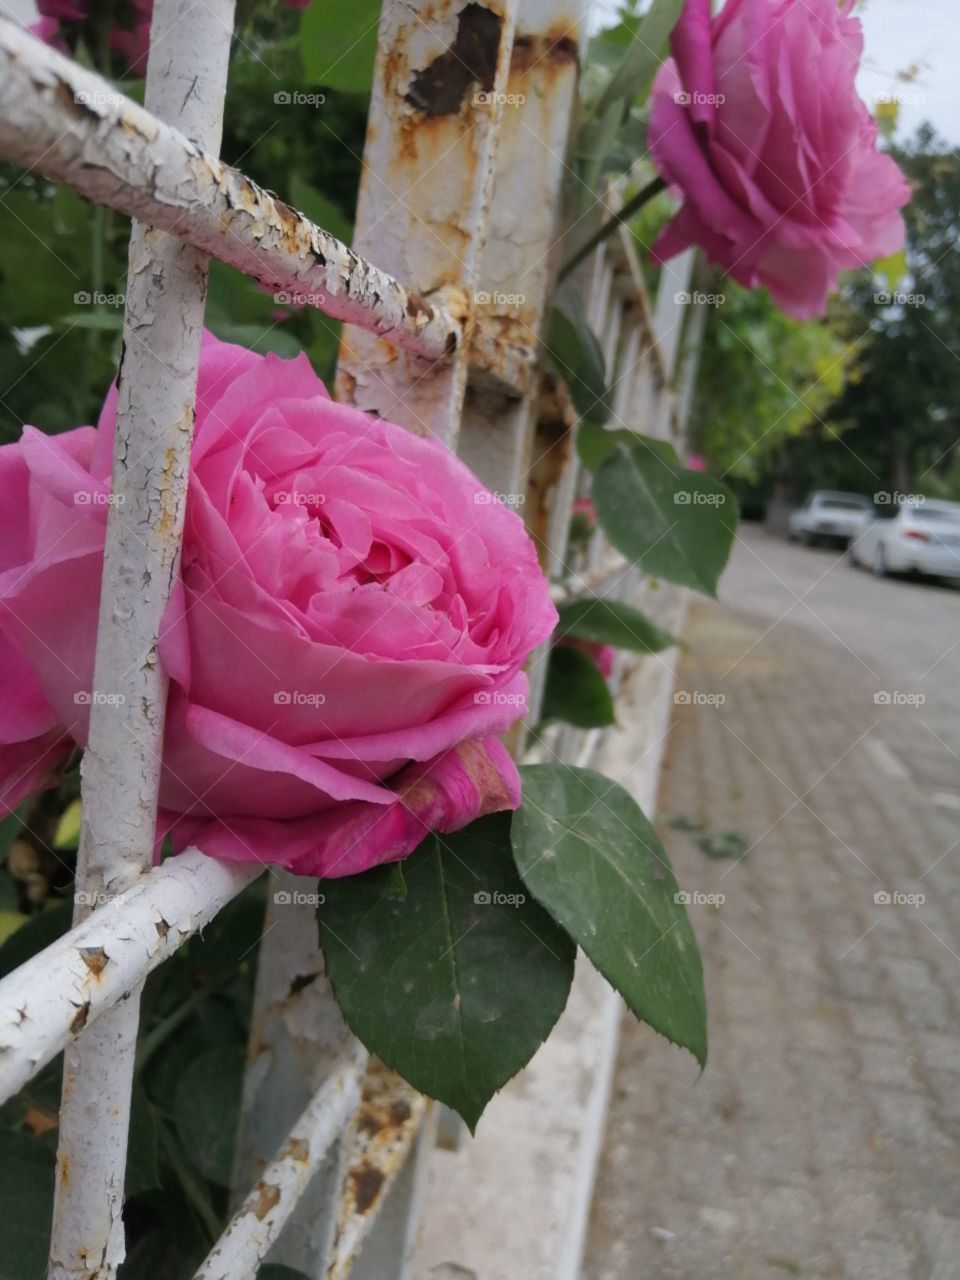 pink rose flowers behind a rusty white metal grille